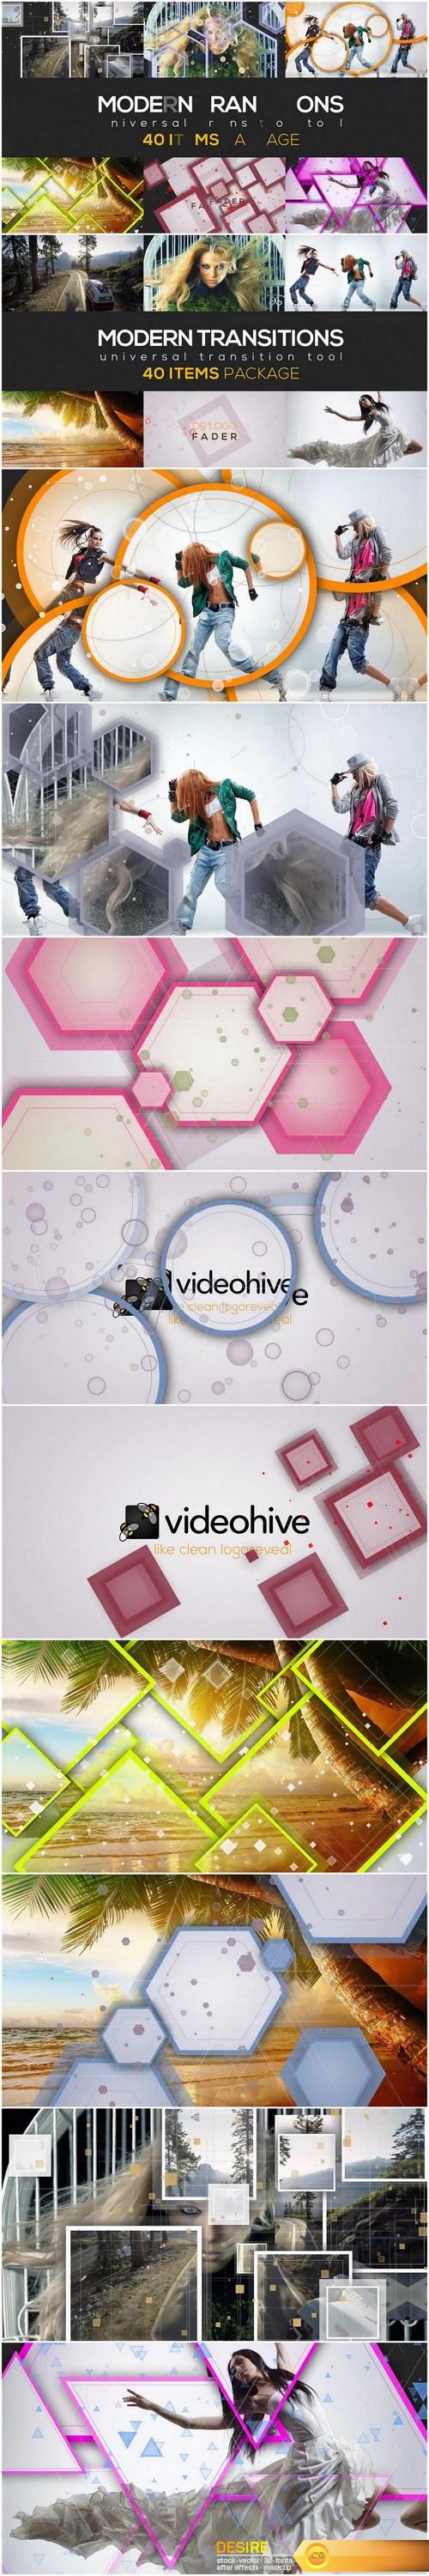 Videohive 19830451 modern transition pack 40 items